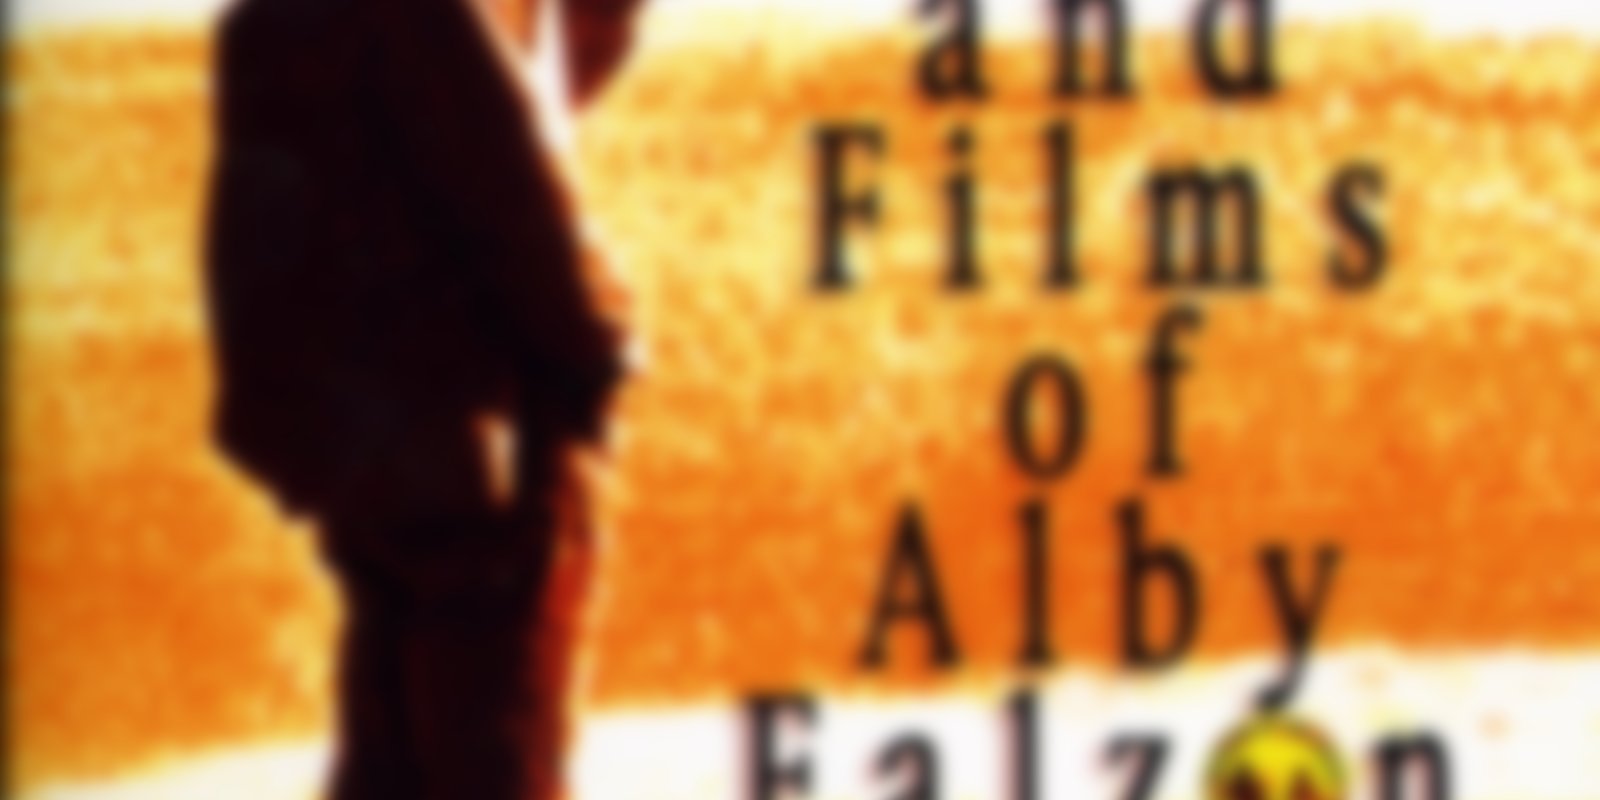 The Life and Films of Alby Falzon